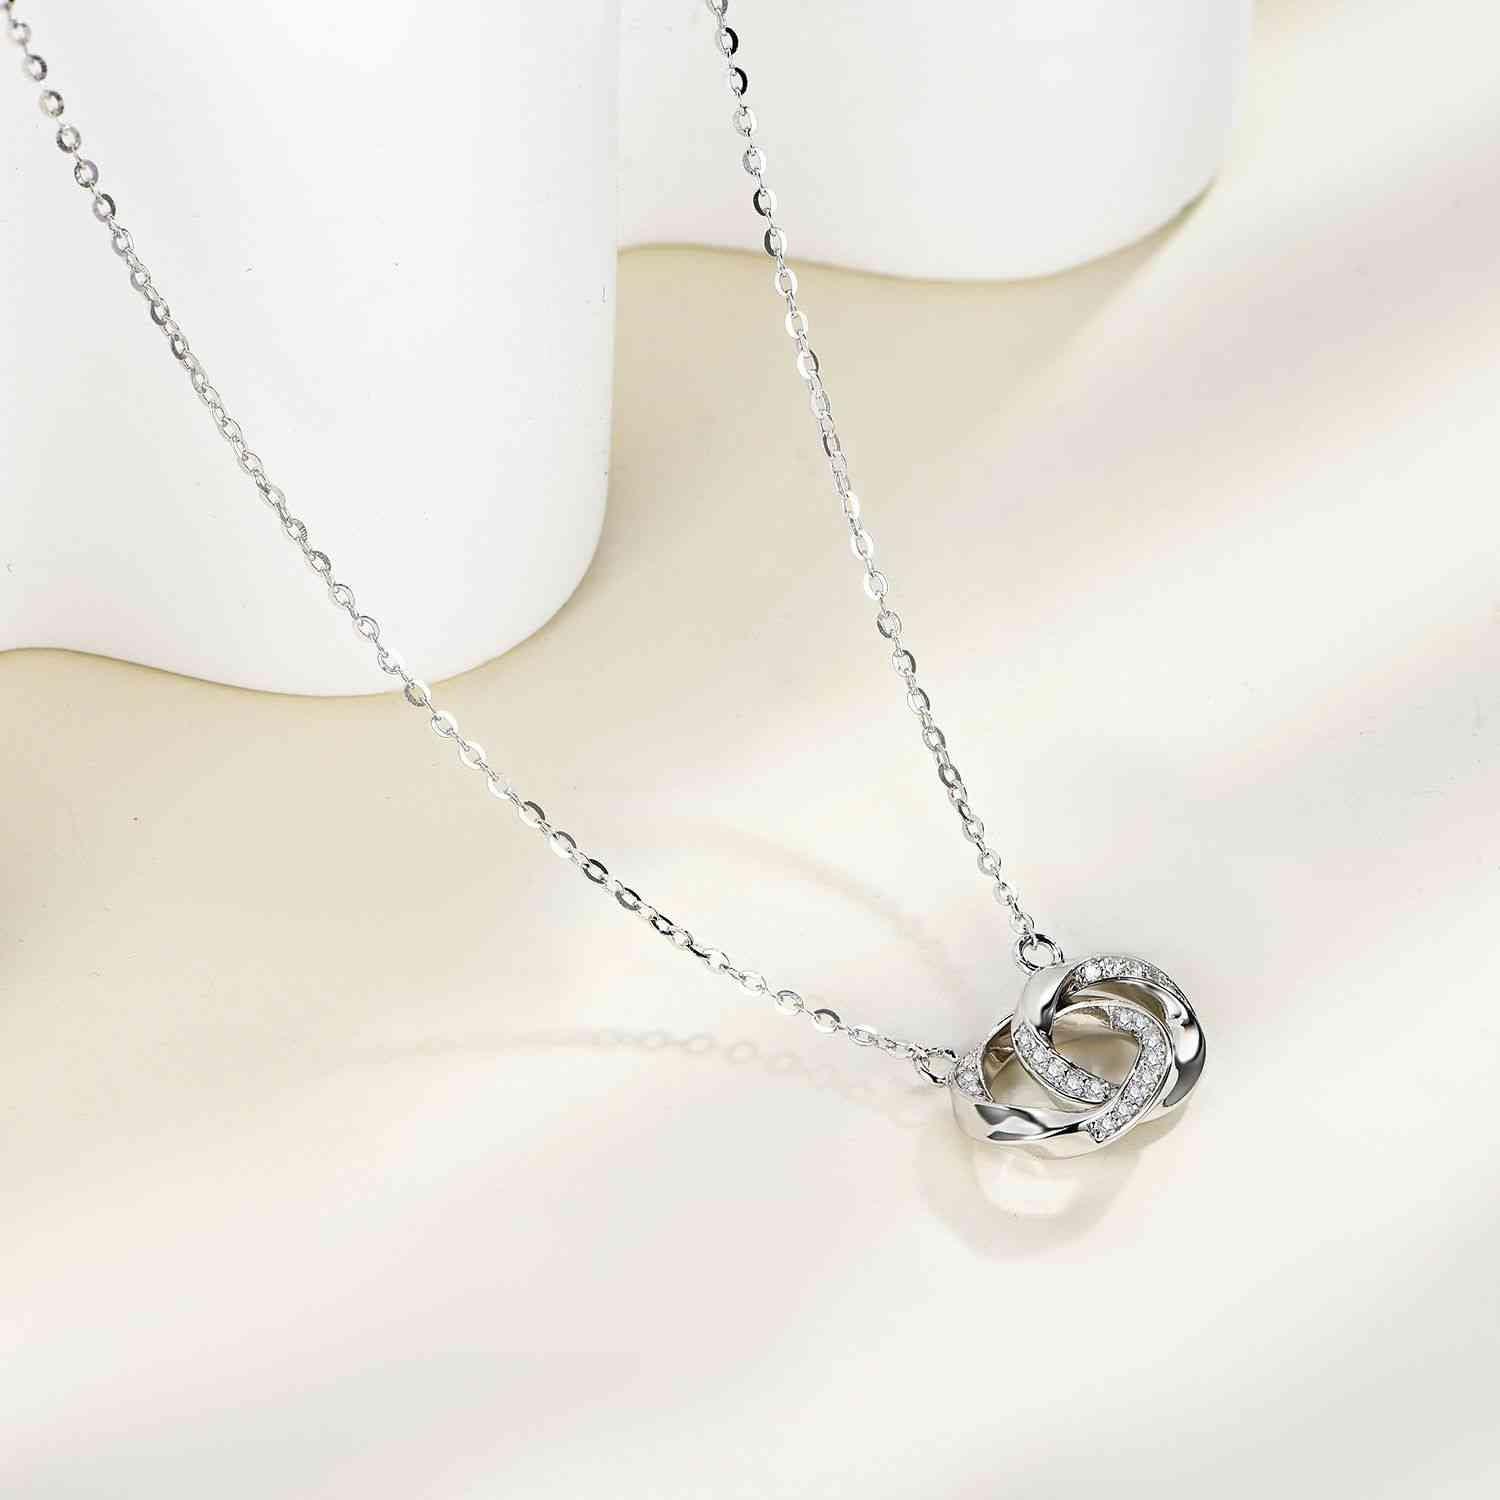 Moissanite 925 Sterling Silver/18K Rose Gold Interlocking/Eternity Hoop Necklace - God's Girl Gifts And Apparel